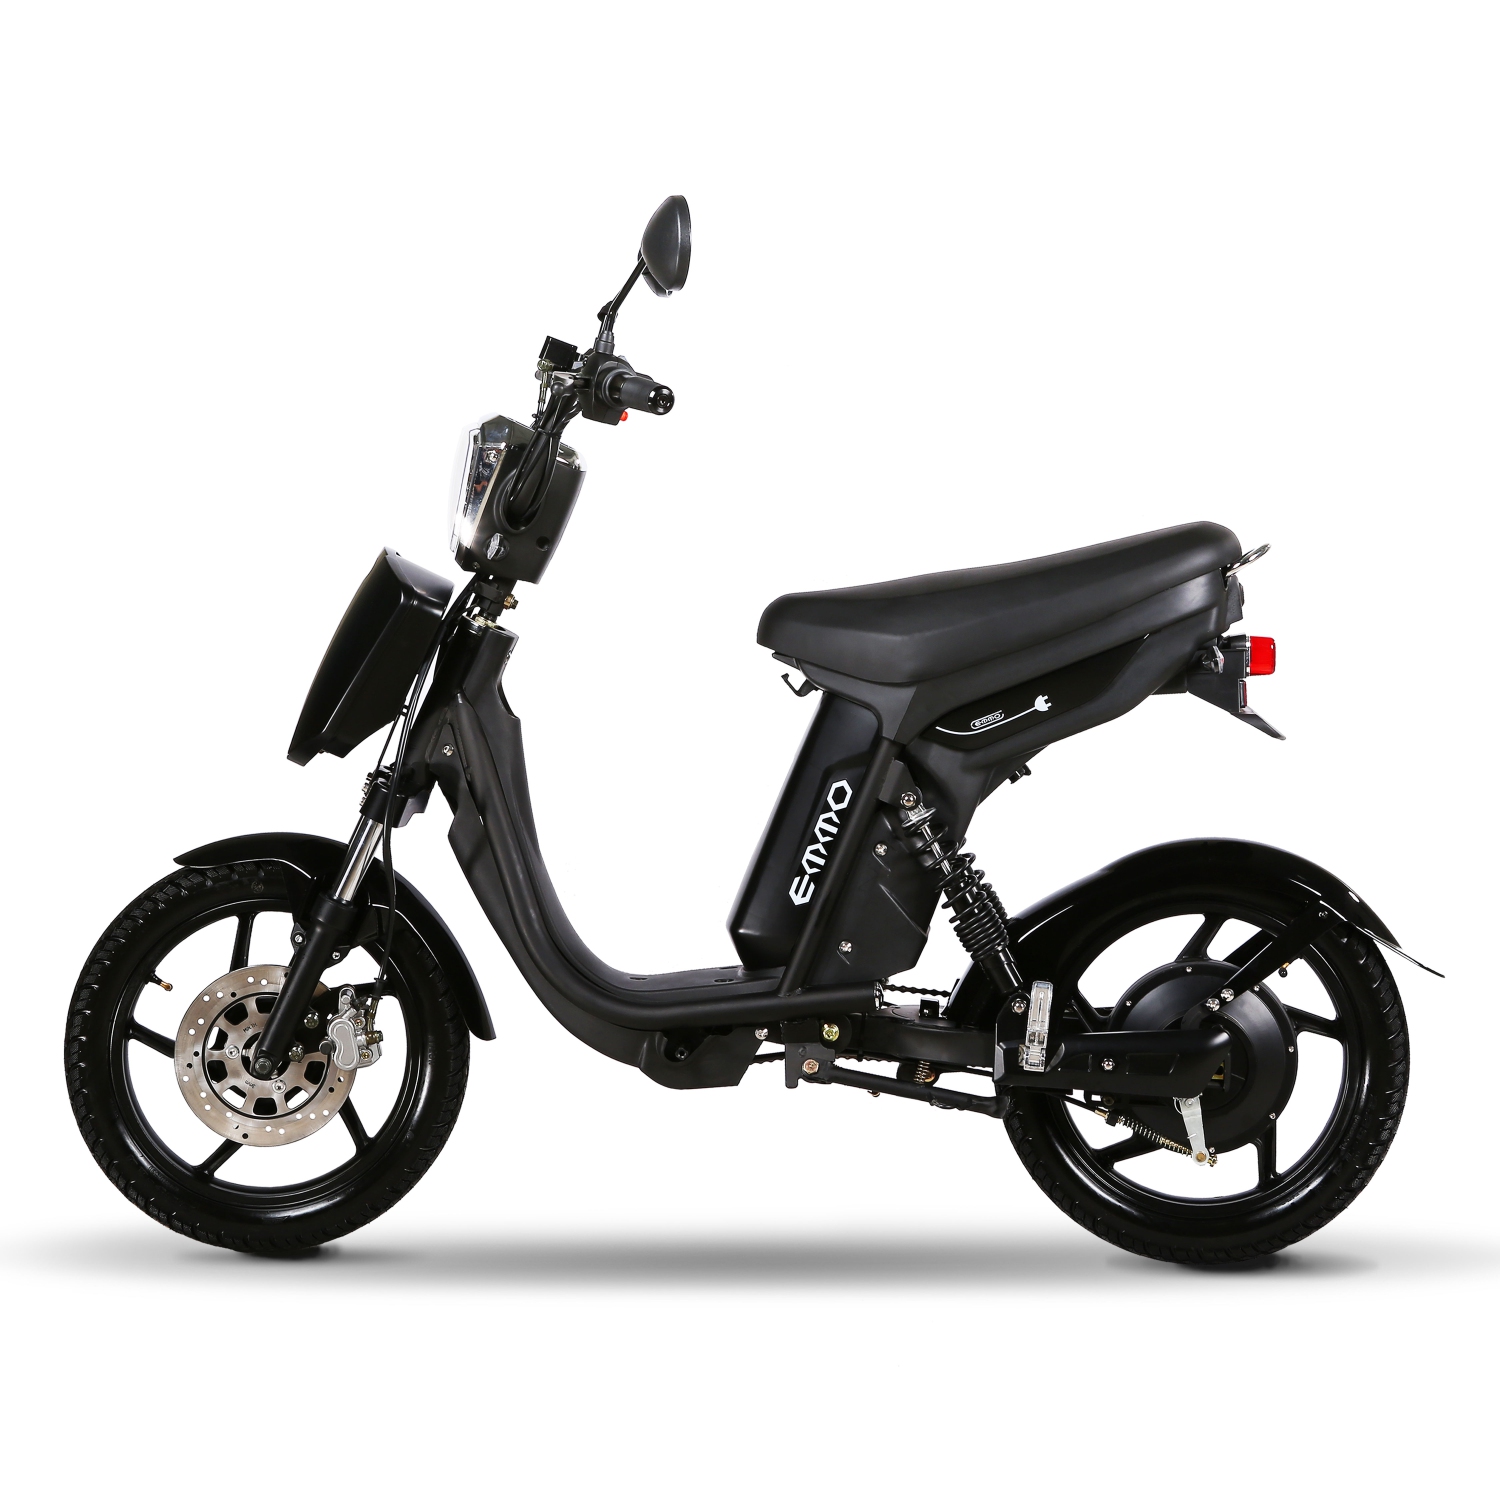 Emmo Compact Moped Electric Bike - Step Thru Scooter - 48V Removable SLA Battery - Durable Tubeless Tire - Full Suspension - Urban T Black